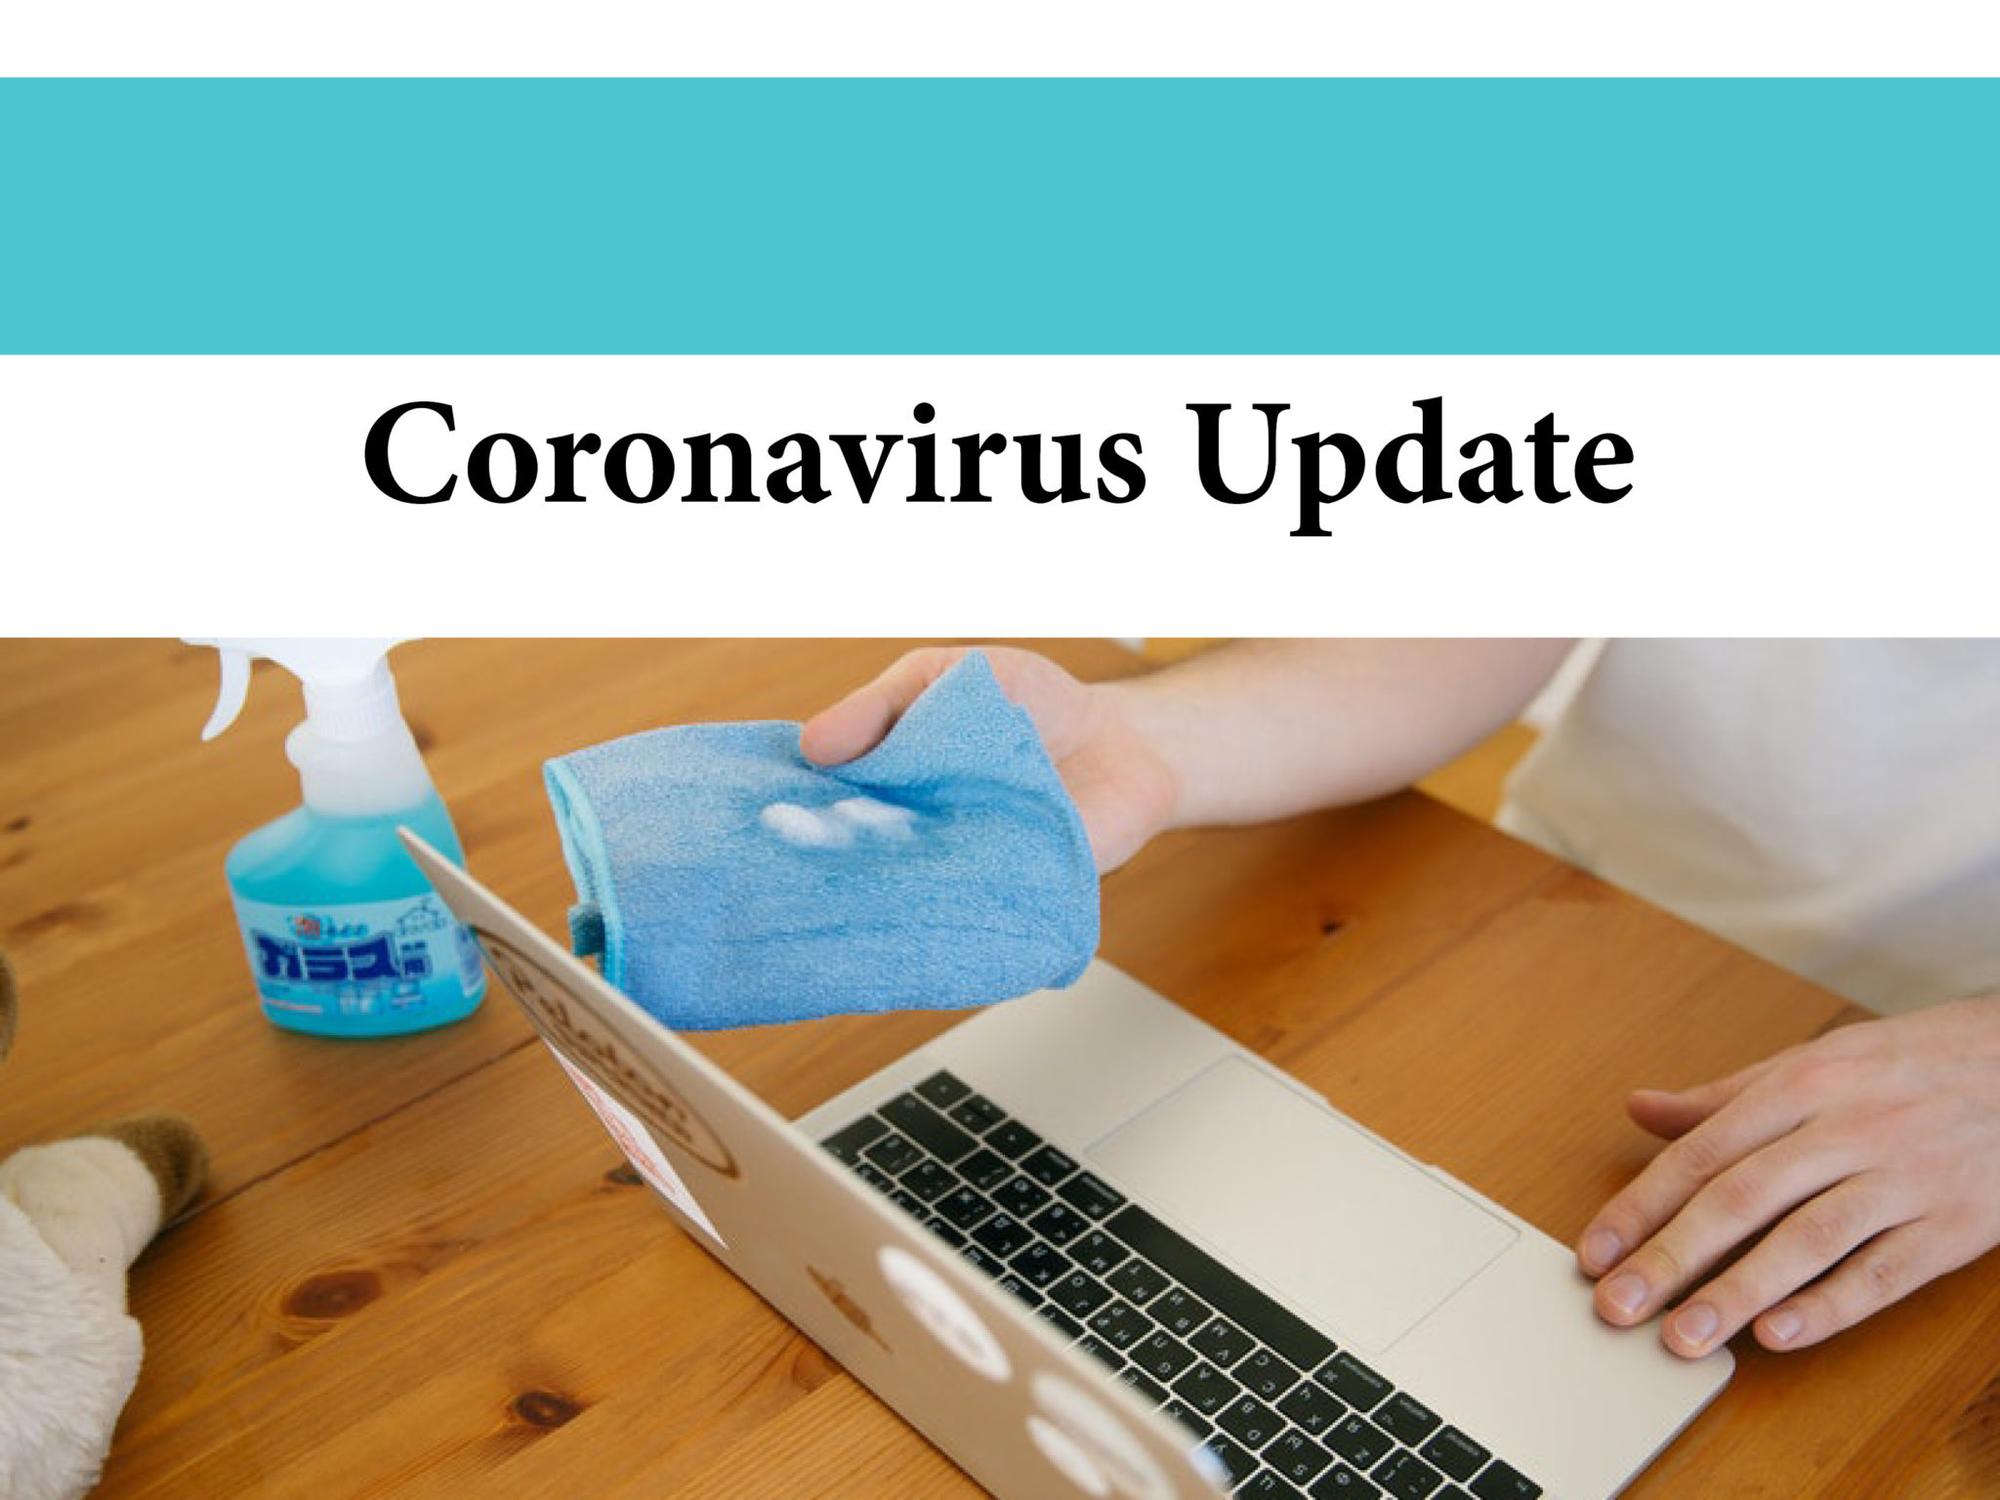 Active COVID-19 cases in Eastern Ontario Health Unit decreases to 33 on Sunday, May 31